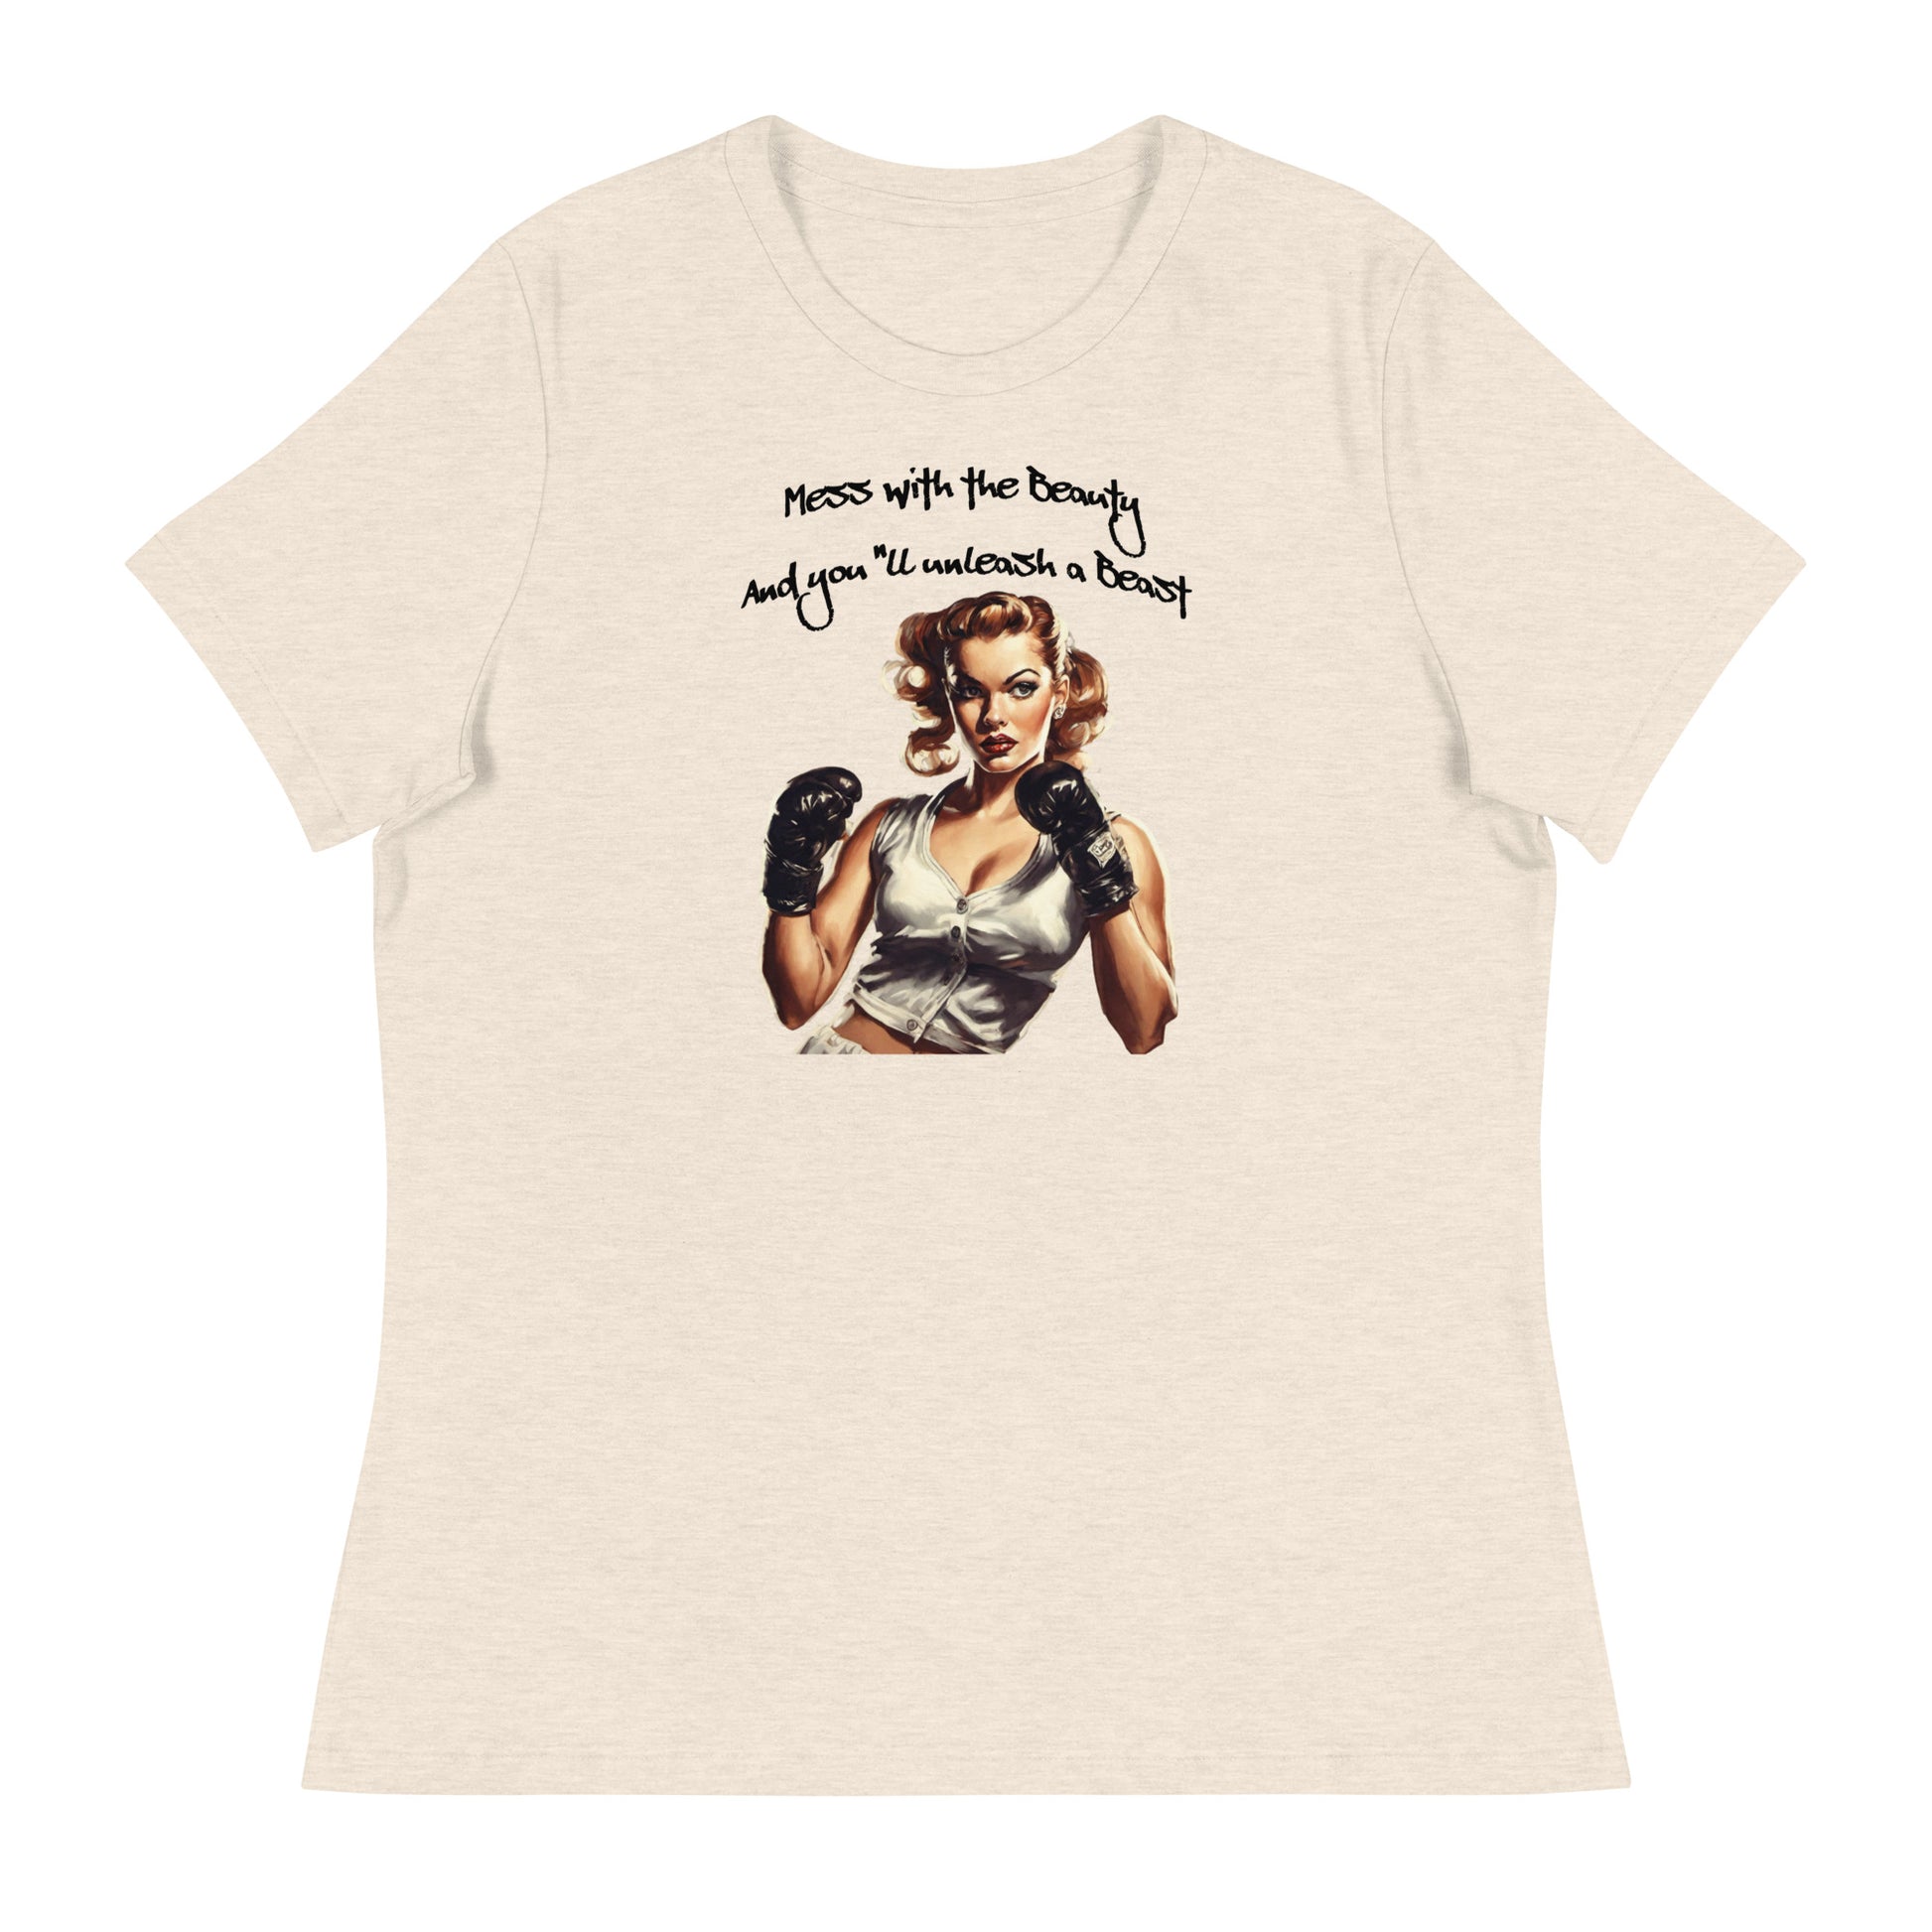 Mess with the Beauty, Unleash the Beast Women's Strength T-Shirt Heather Prism Natural